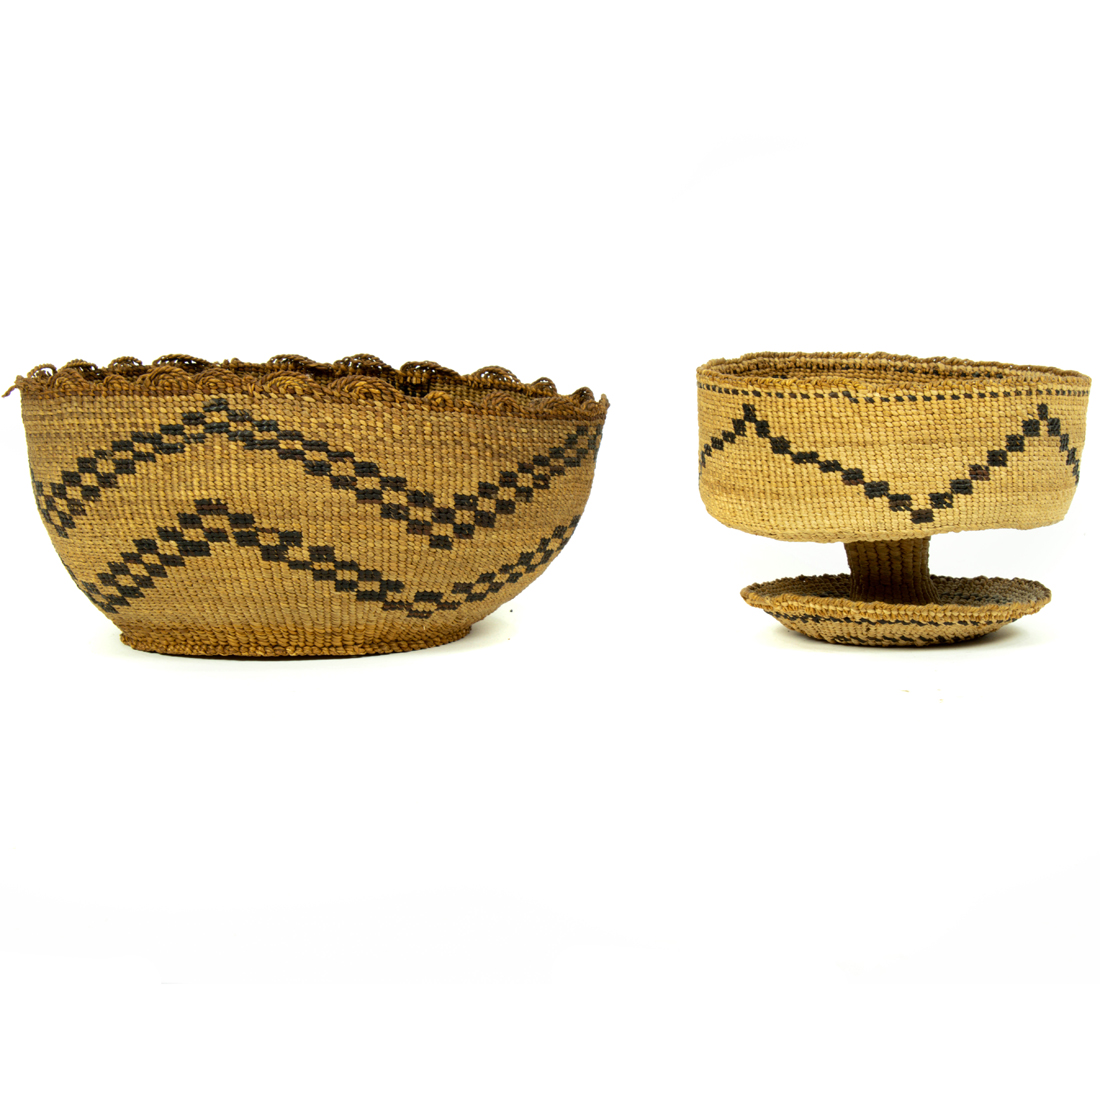  LOT OF 2 NATIVE AMERICAN BASKETRY 2d26e1